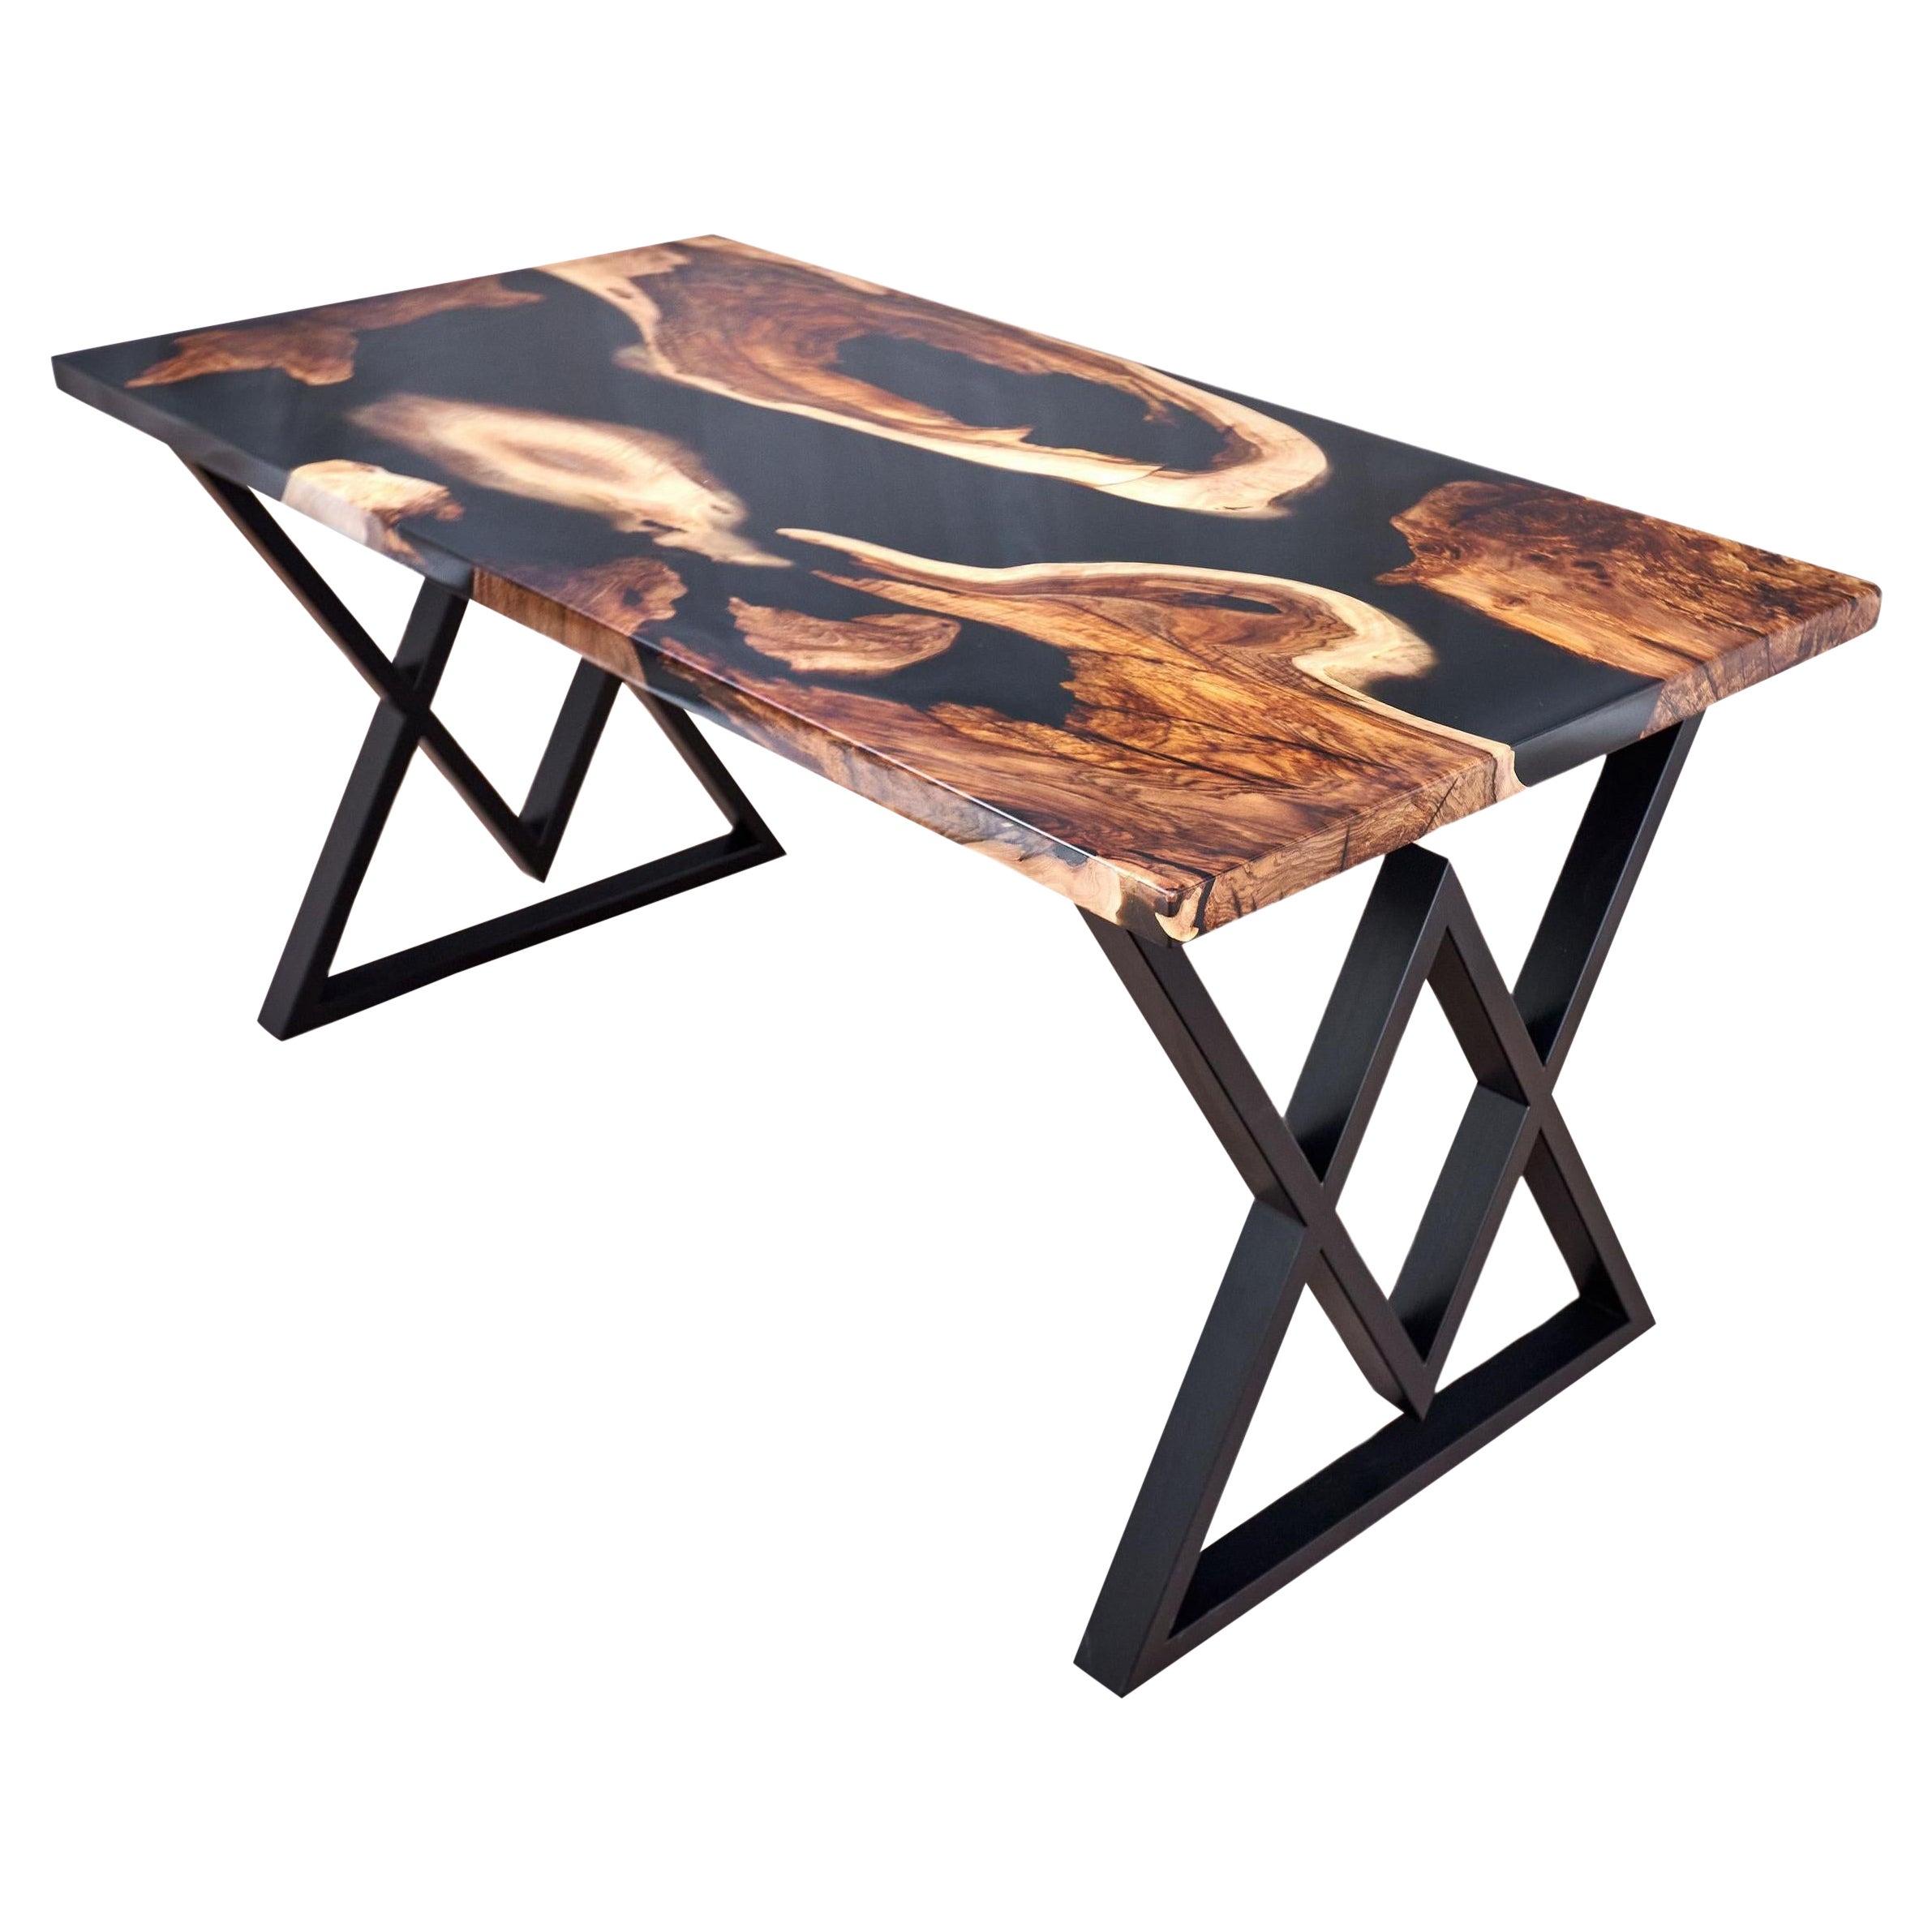 Midcentury Modern Dining Table Contemporary Dining Table Handmade Rustic Tables im Angebot